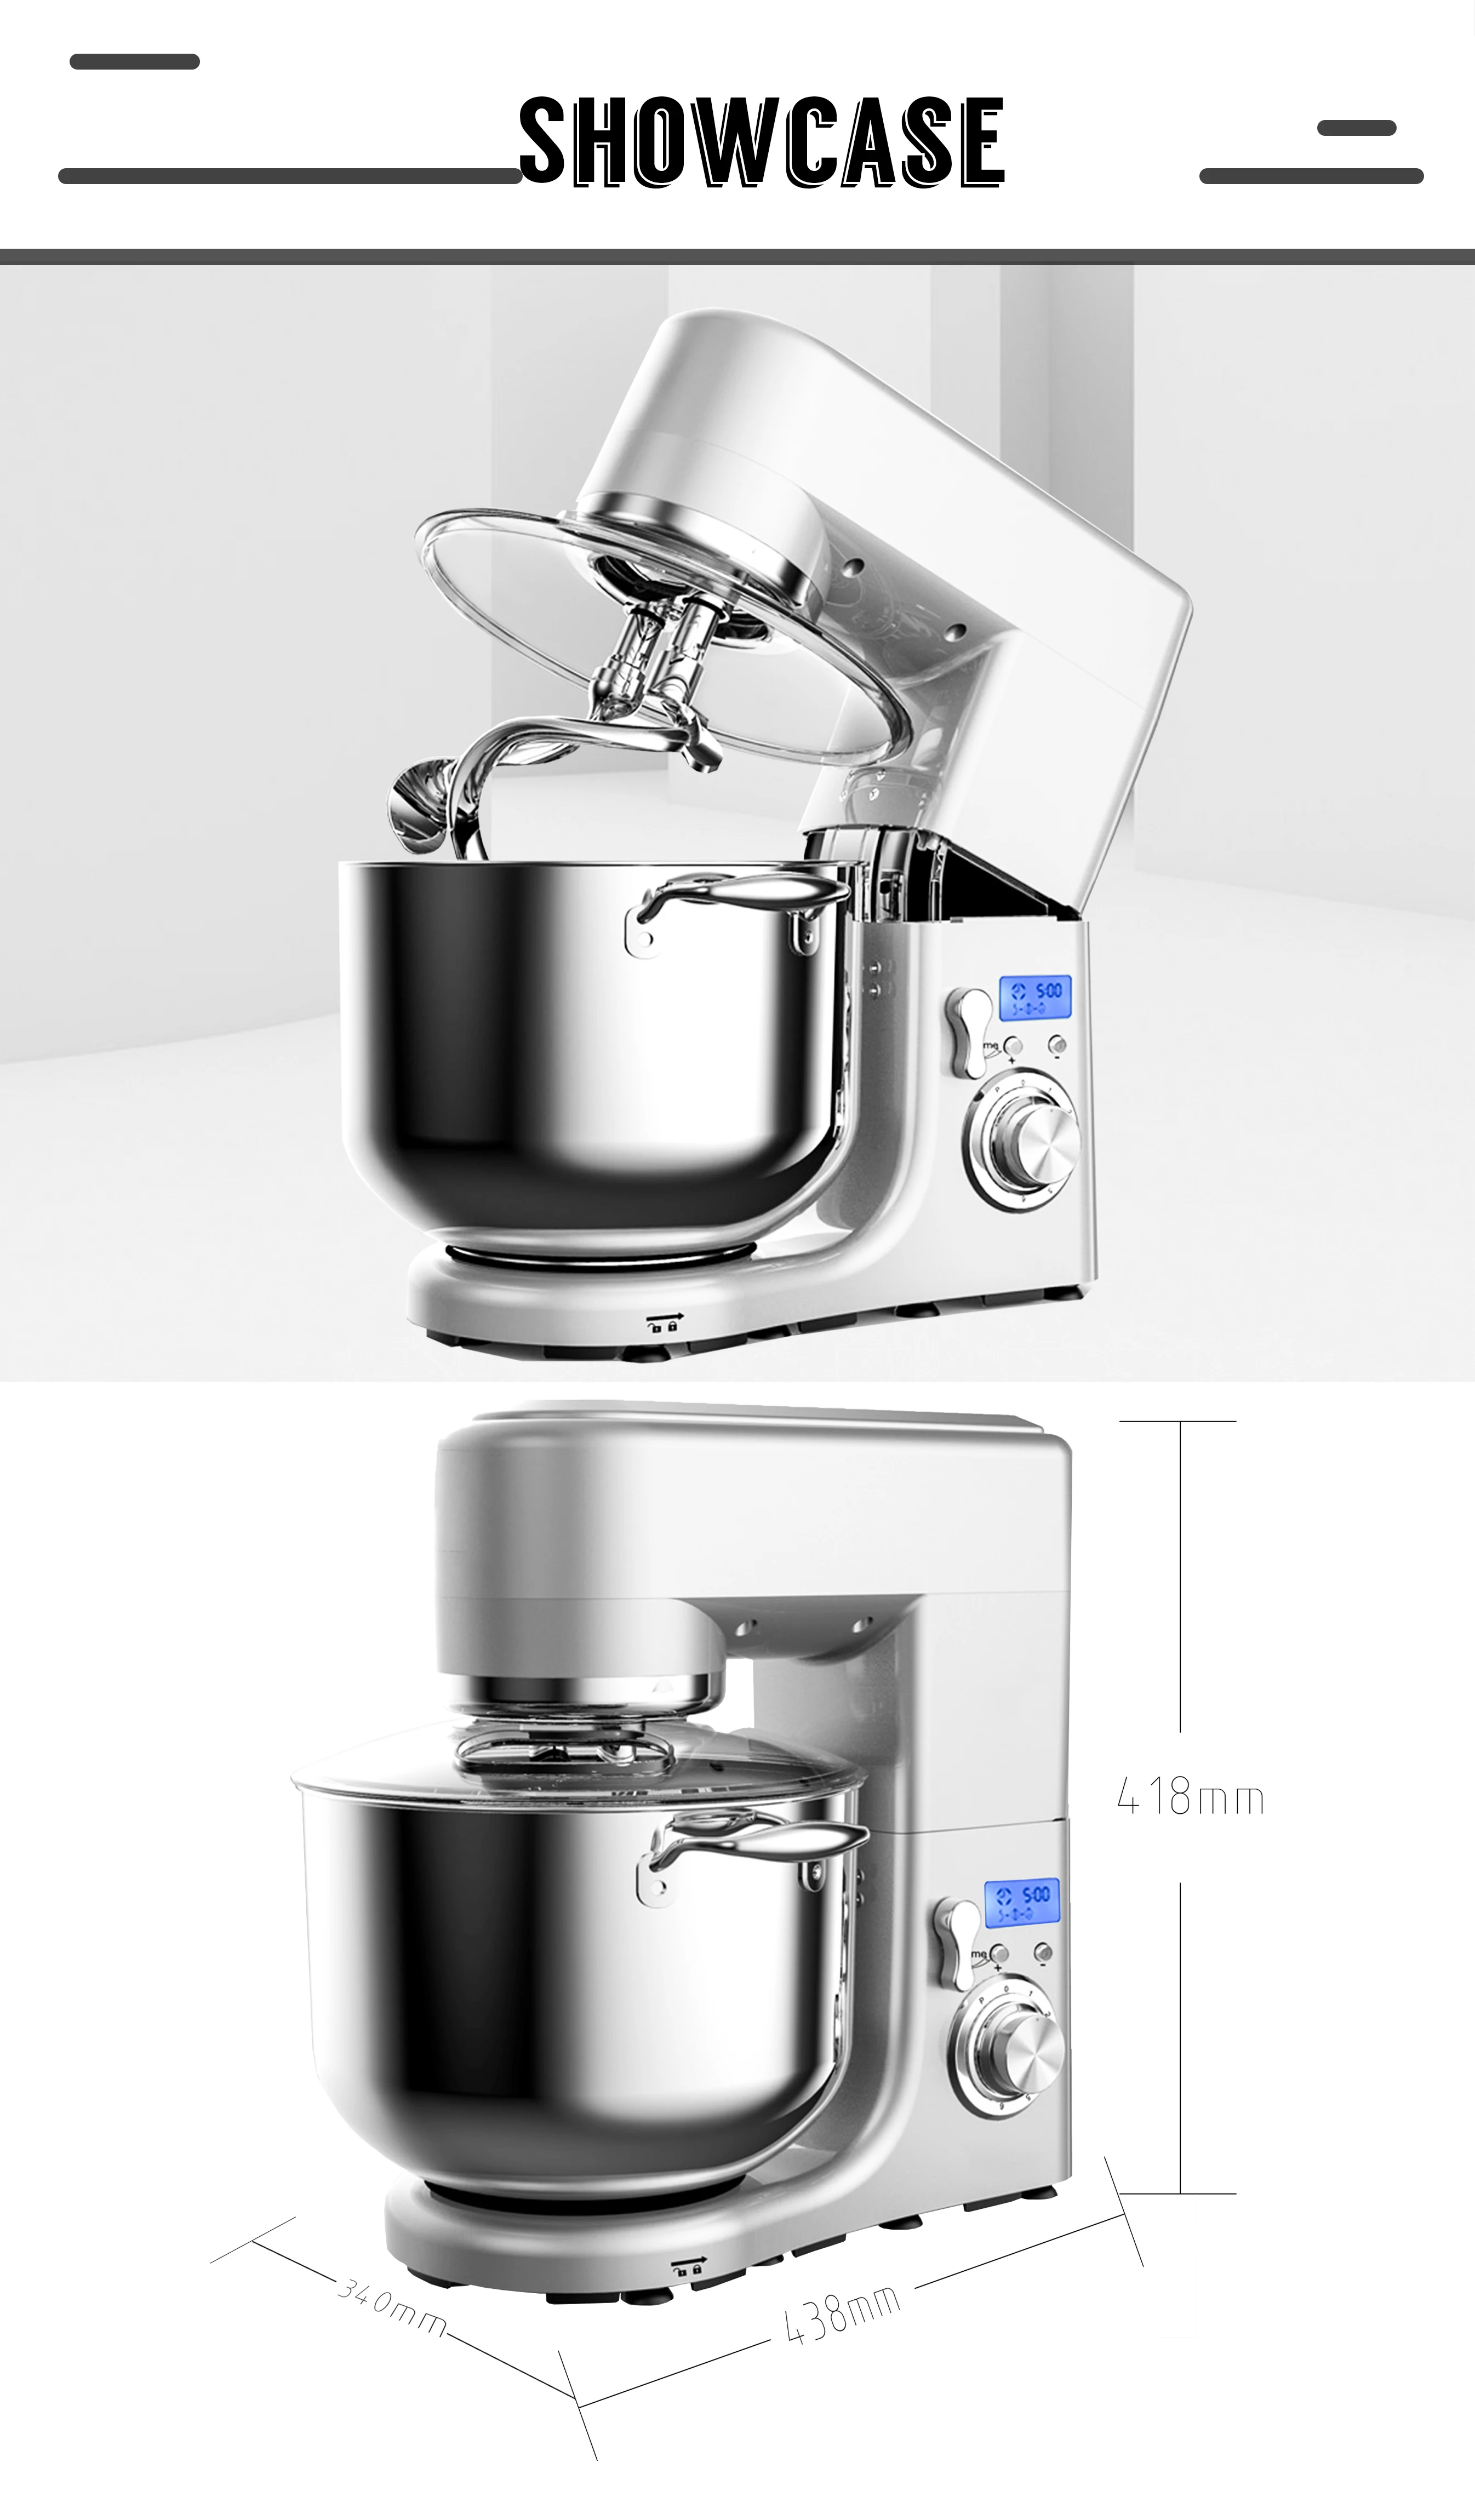 Stainless steel 10 liter ood mixer bracket automatic flour egg bread planetary mixer